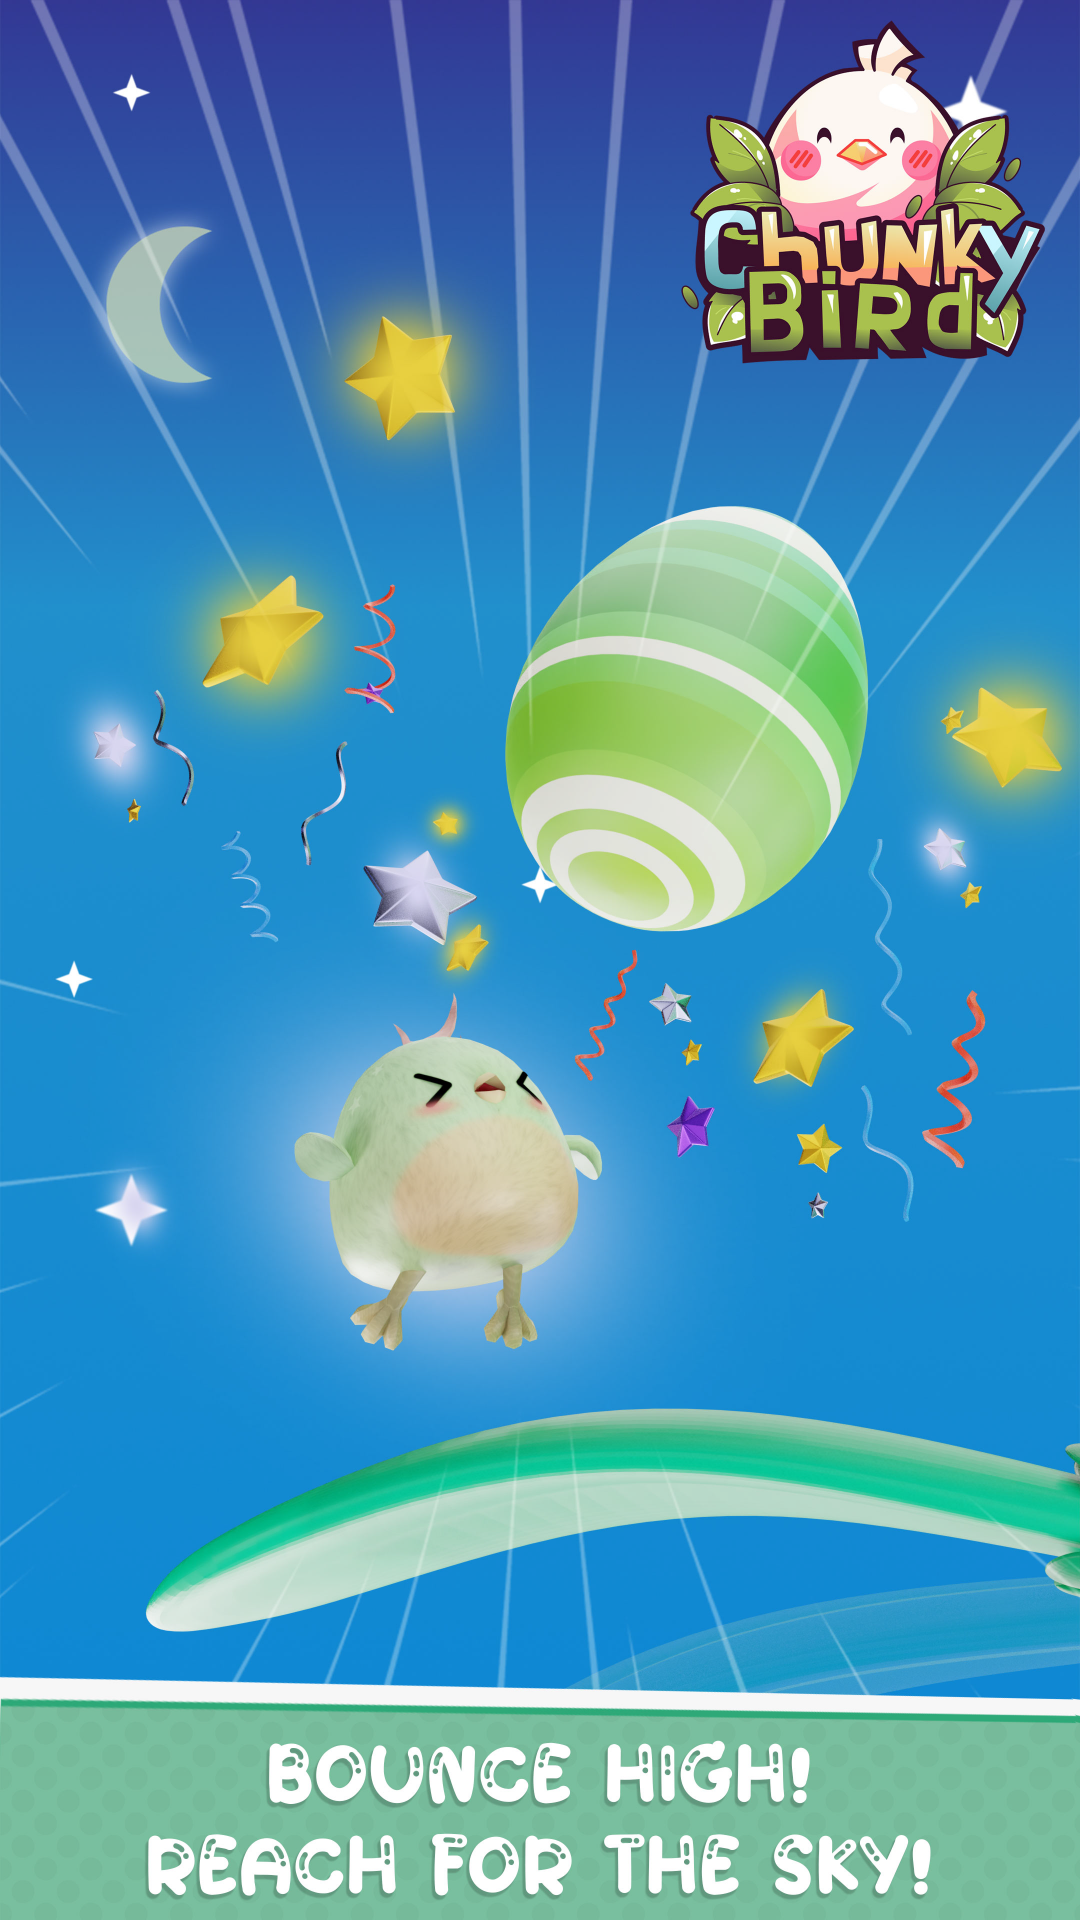 A screenshot of Chunky Bird, showing the character with the background of a vibrant starry night sky.